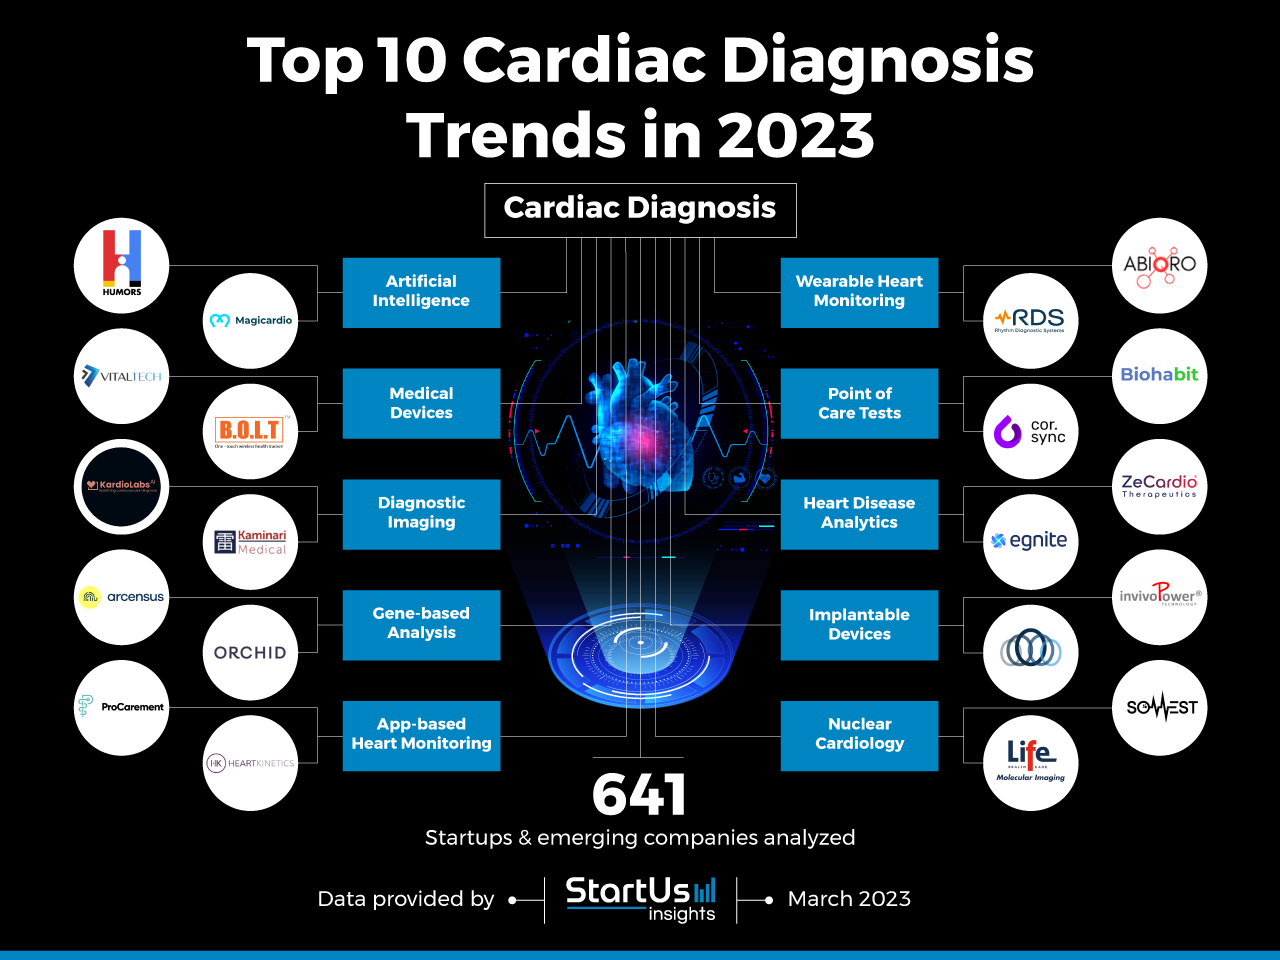 Top 10 Cardiac Diagnosis Trends in 2023